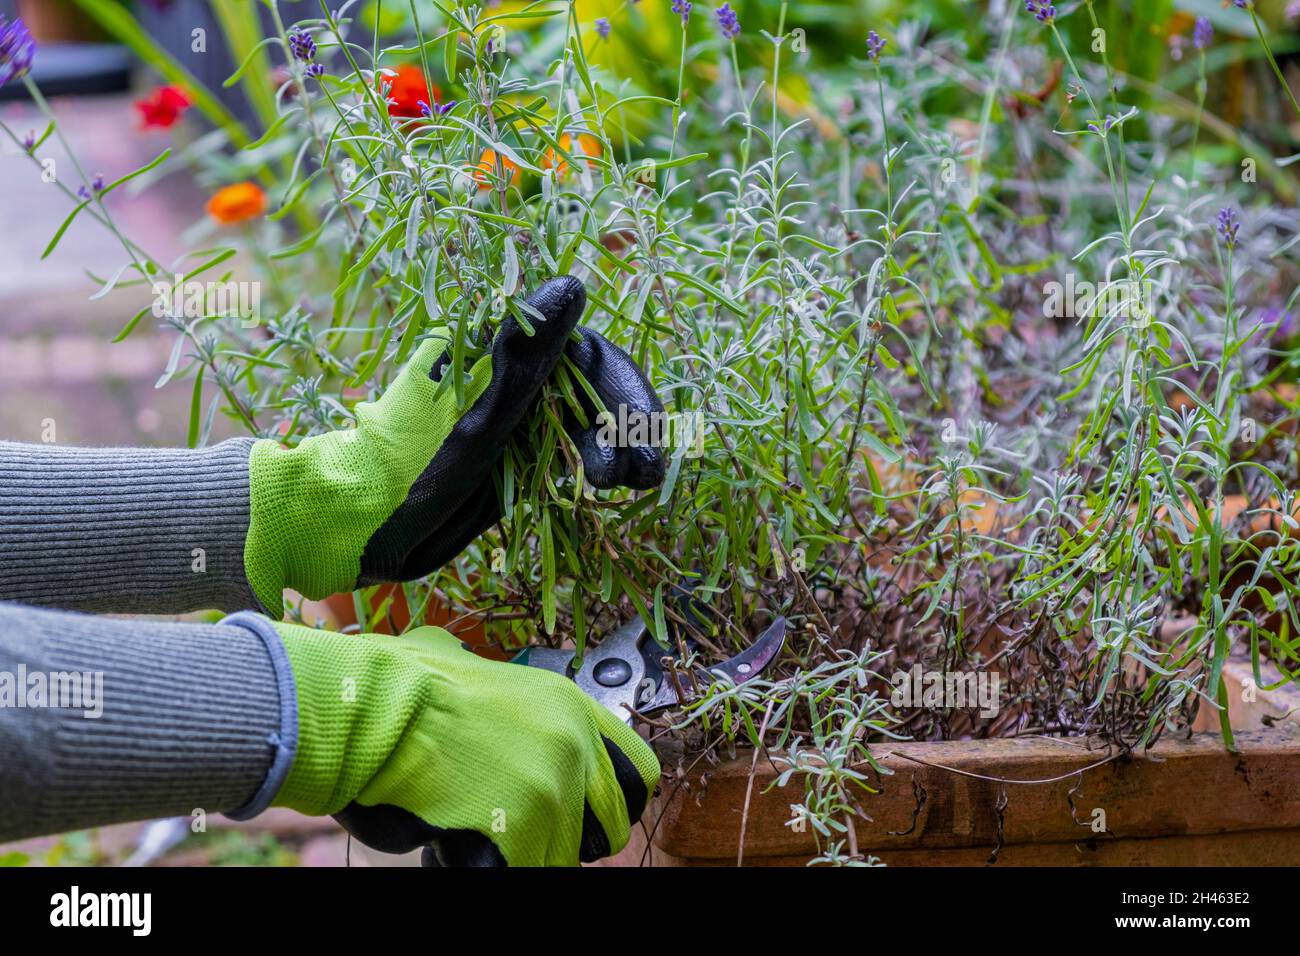 Gardener's hands in gloves with garden shears. Pruning lavender in the fall. Stock Photo